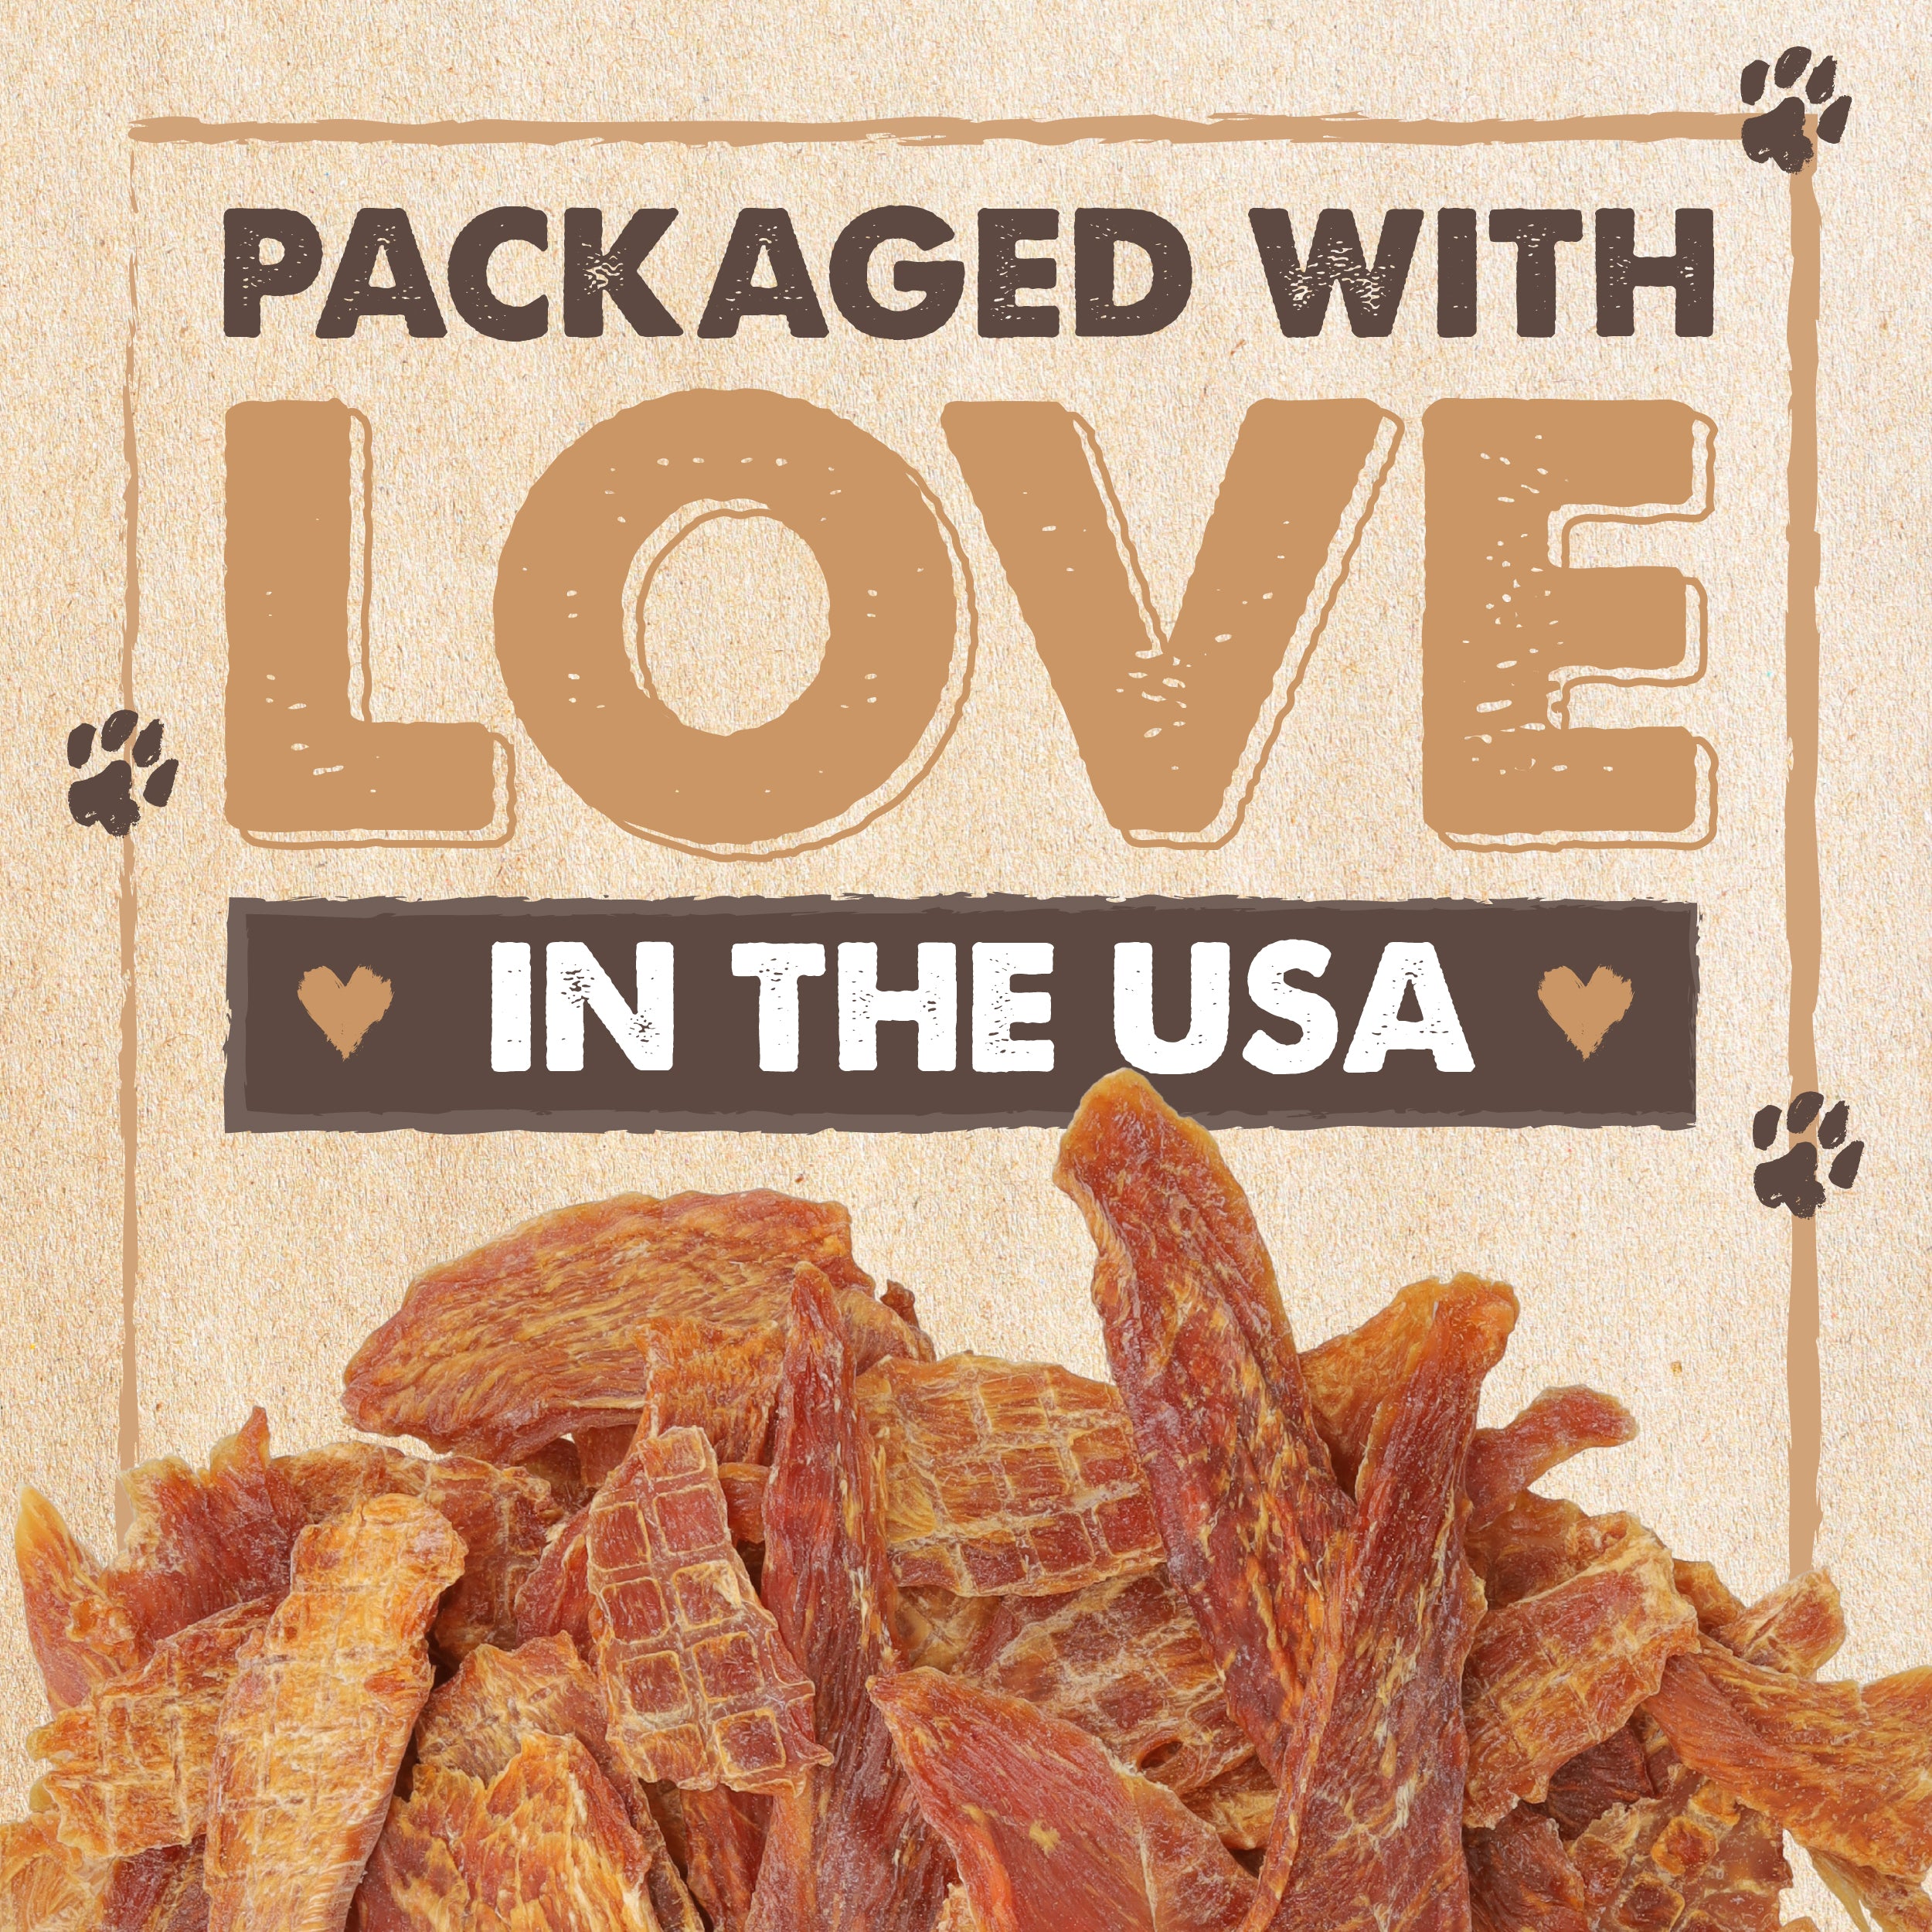 Mighty Paw Naturals Chicken Jerky: A Wholesome Snack for Dogs